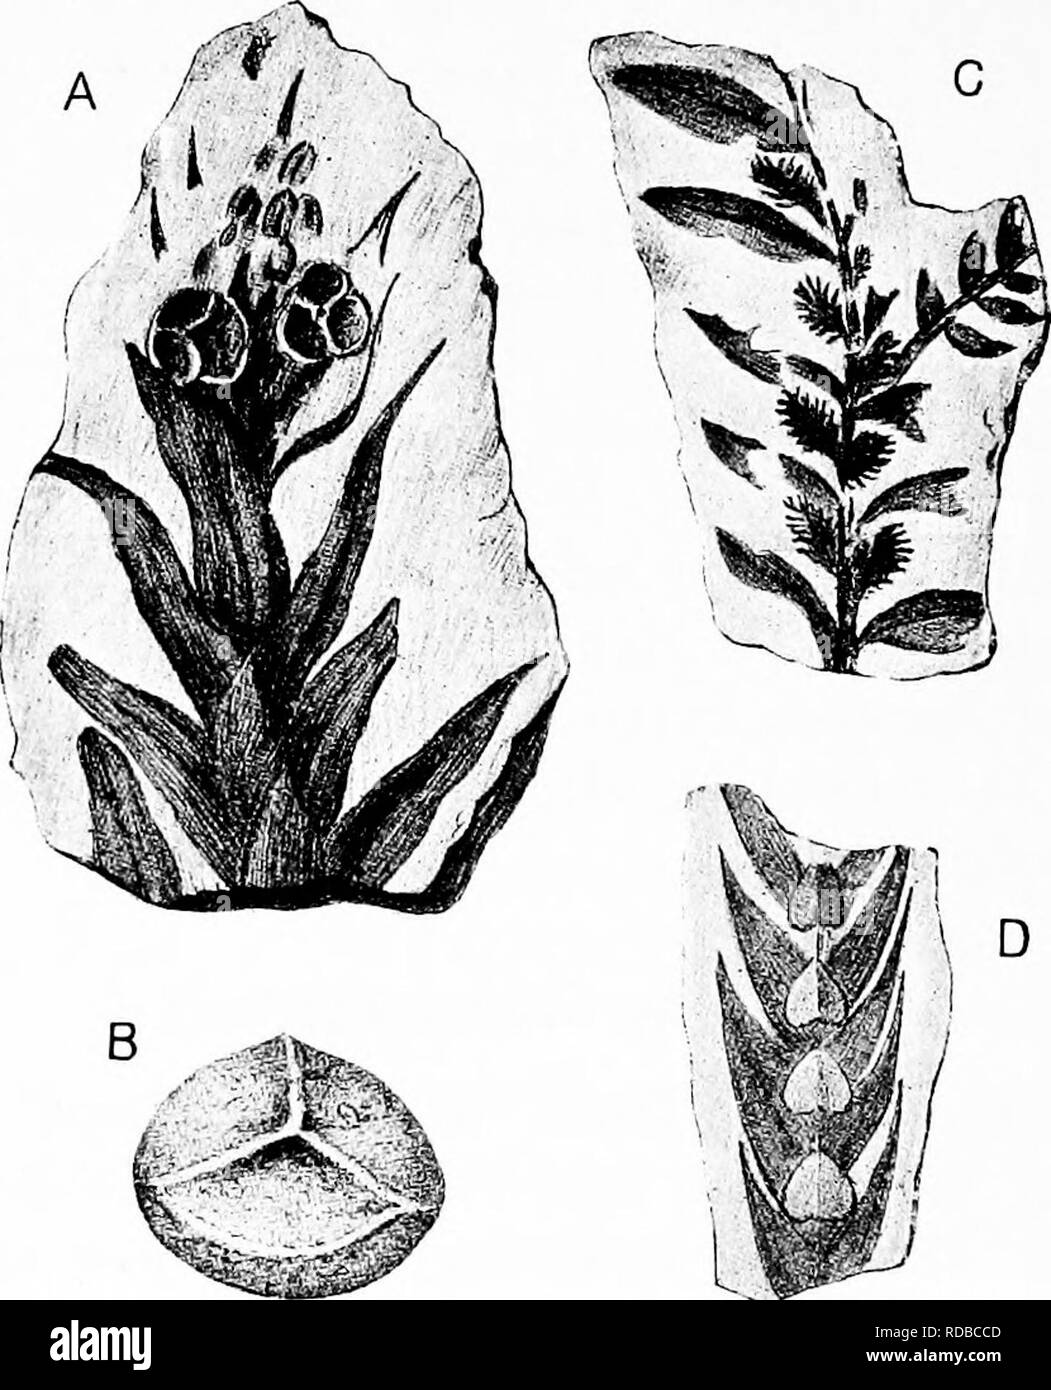 . Fossil plants : for students of botany and geology . Paleobotany. 80 LYCOPODIALES [CH. phylly. The shoots closely resemble Selaginellites primaevus^ (Gold). Lycopodites Zeilleri Hailed Fig. 135, C. Halle has founded this species on specimens, from the Coal- Measures of Zwickau in Saxony, characterised by dimorphic. Fig. 135. Selaginellites and Lycopodites. (After Halle.) A. Selaginellites primaevus [Gold.), x 10. B. MegiiSTpore oi Selagitiellites elongatus {Goi.). x 50. C. Lycopodites Zeilleri Halle. (Nat. size.) D. Selaginellites elongatus (Gold.), x 2. lanceolate leaves in four rows, the  Stock Photo